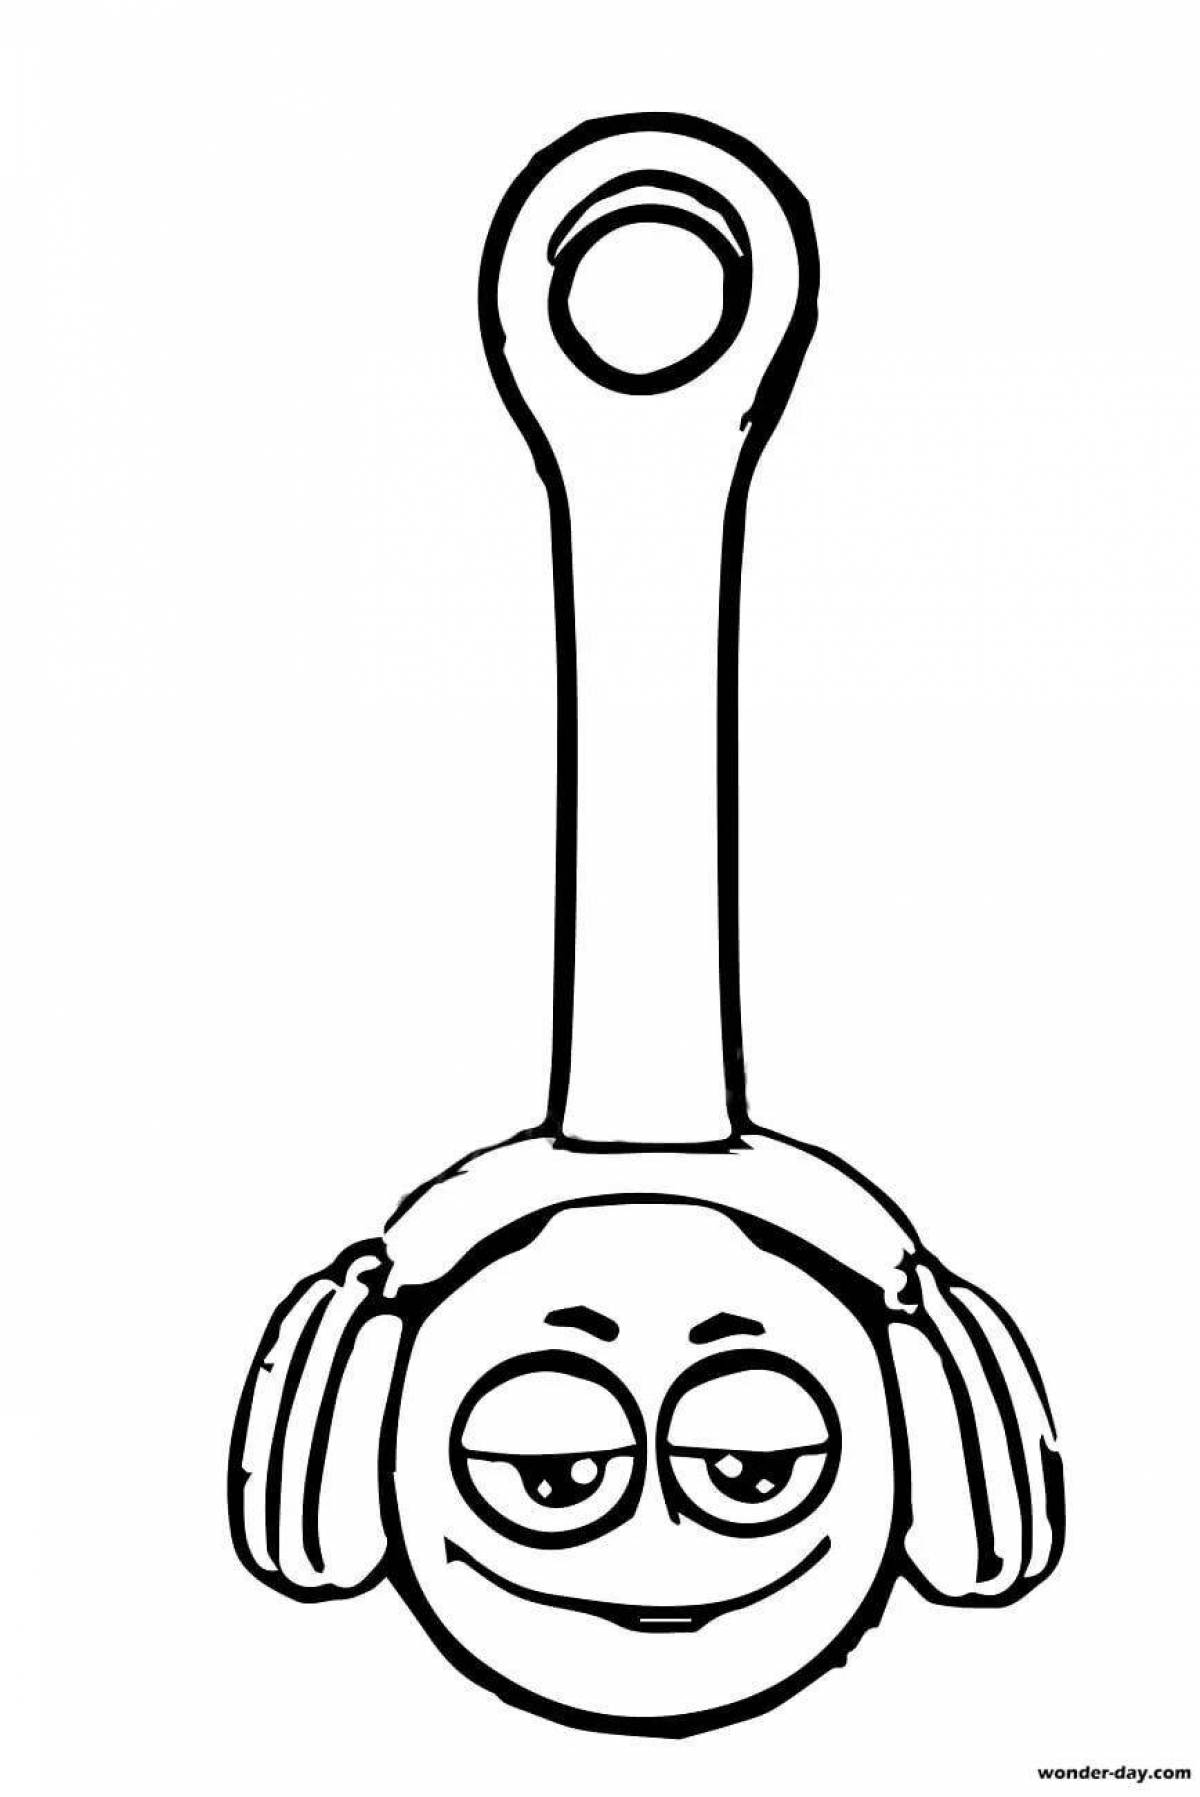 Radiant fasteners 2 coloring page